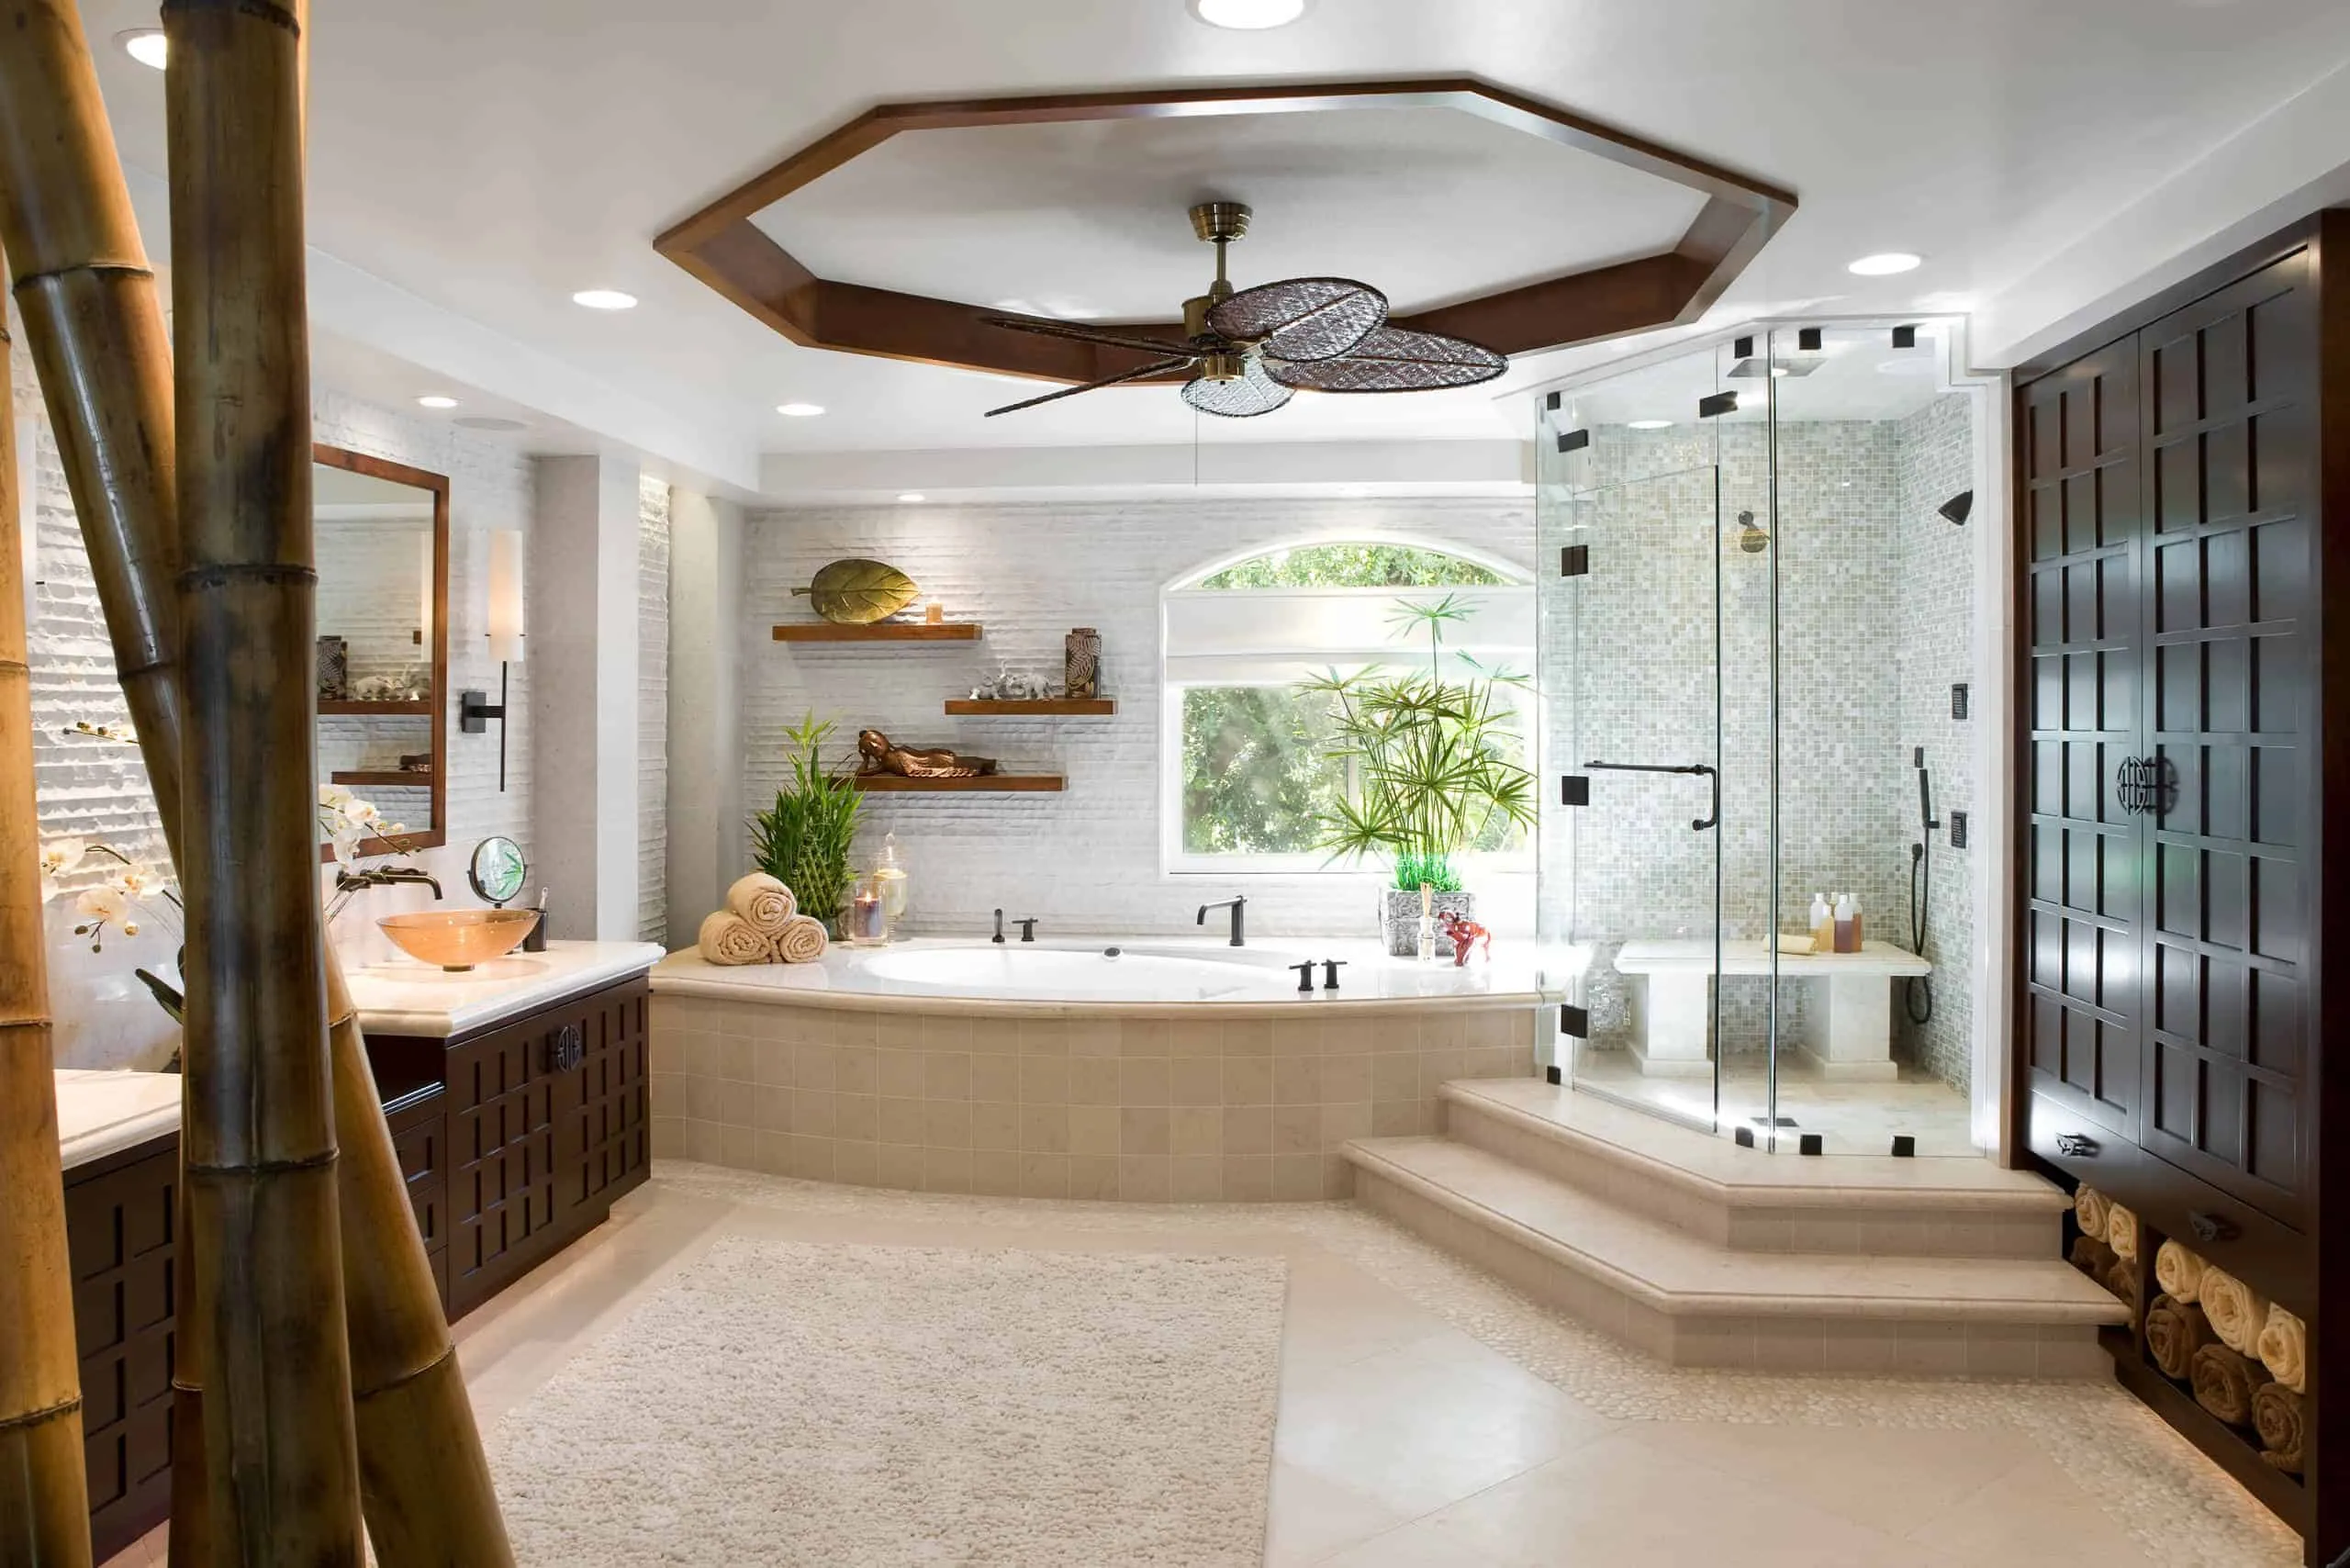 ceiling fans for ventilation of big and small bathroom designs with floor concepts